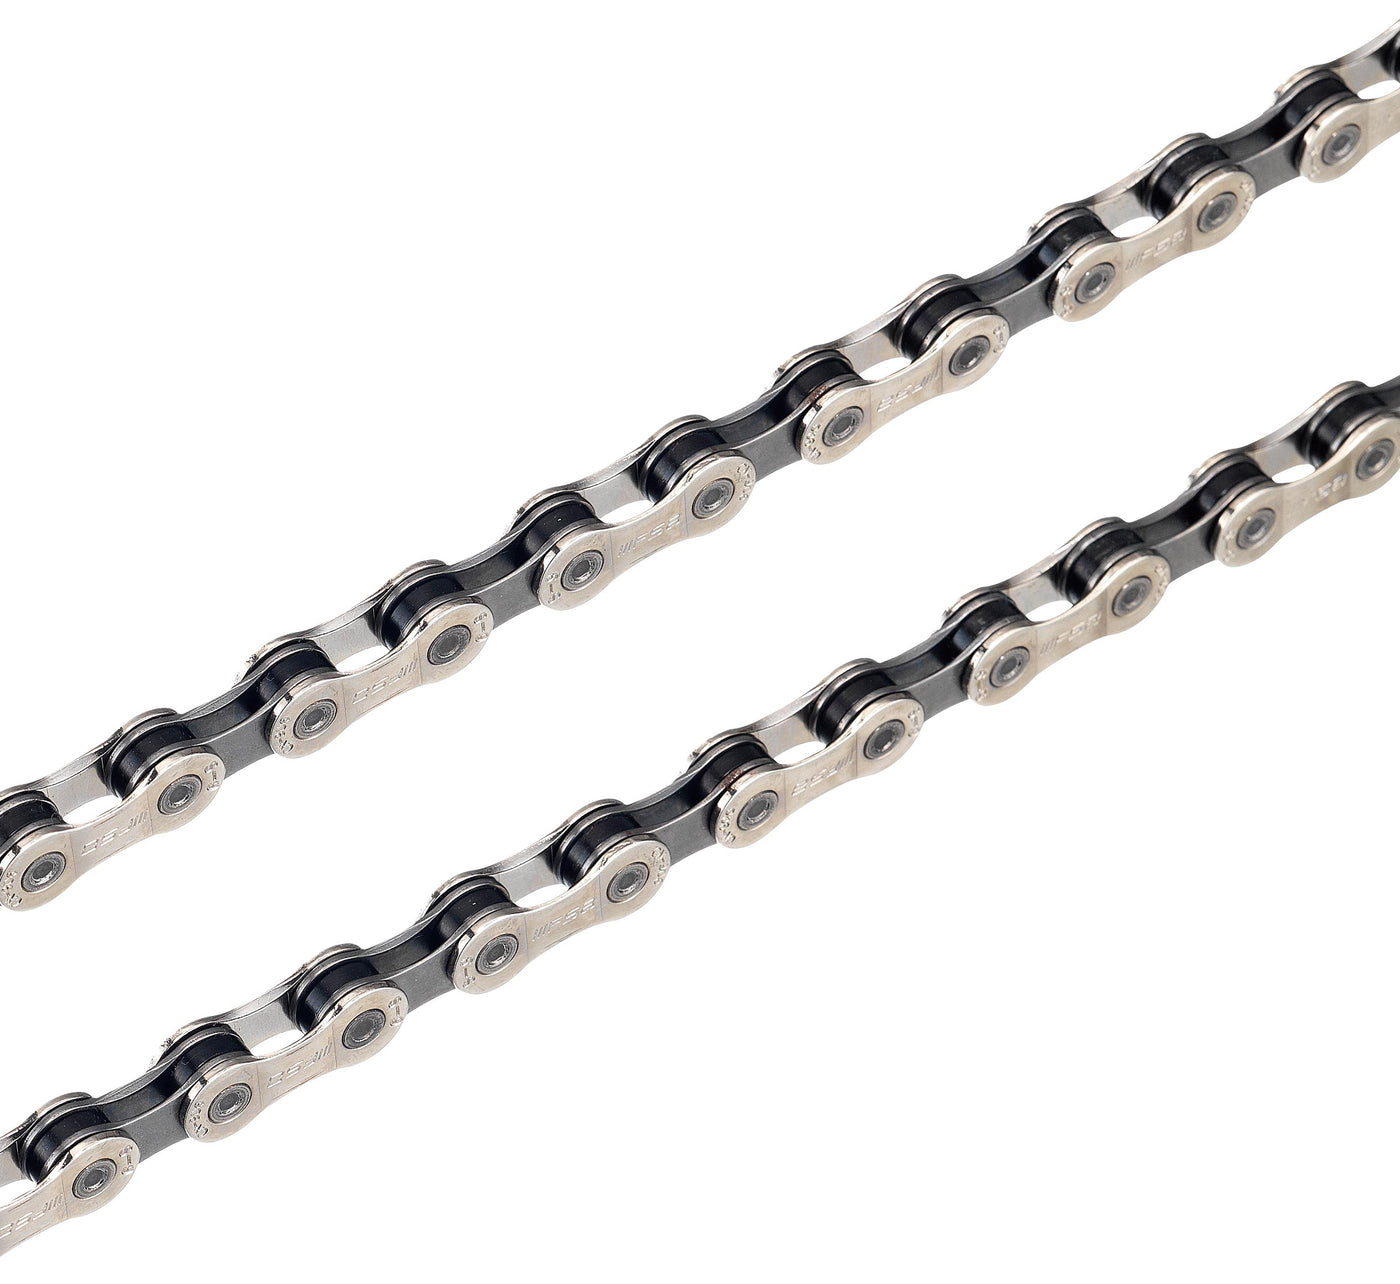 Team Issue 9sp Chain